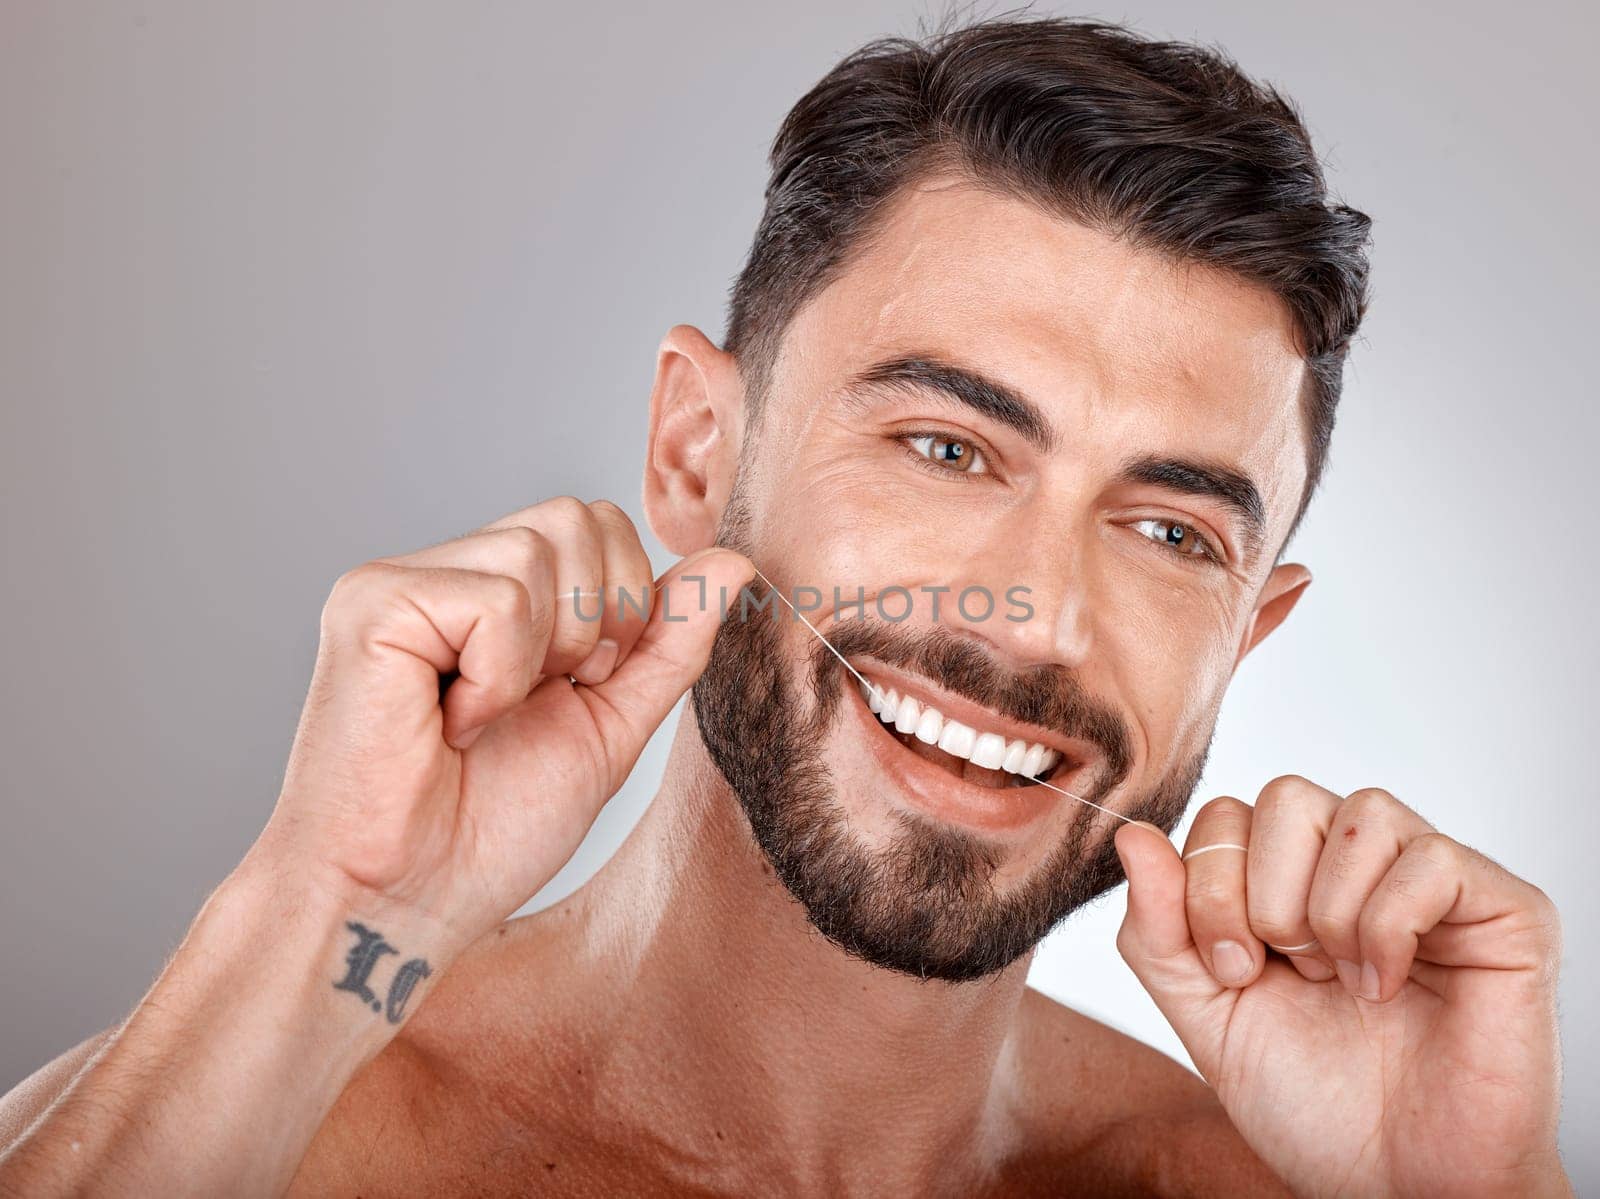 Floss, teeth whitening and happy man with healthy dental lifestyle, wellness or skincare on studio background. Male model face, tooth flossing and cleaning mouth of facial smile, fresh breath or body.